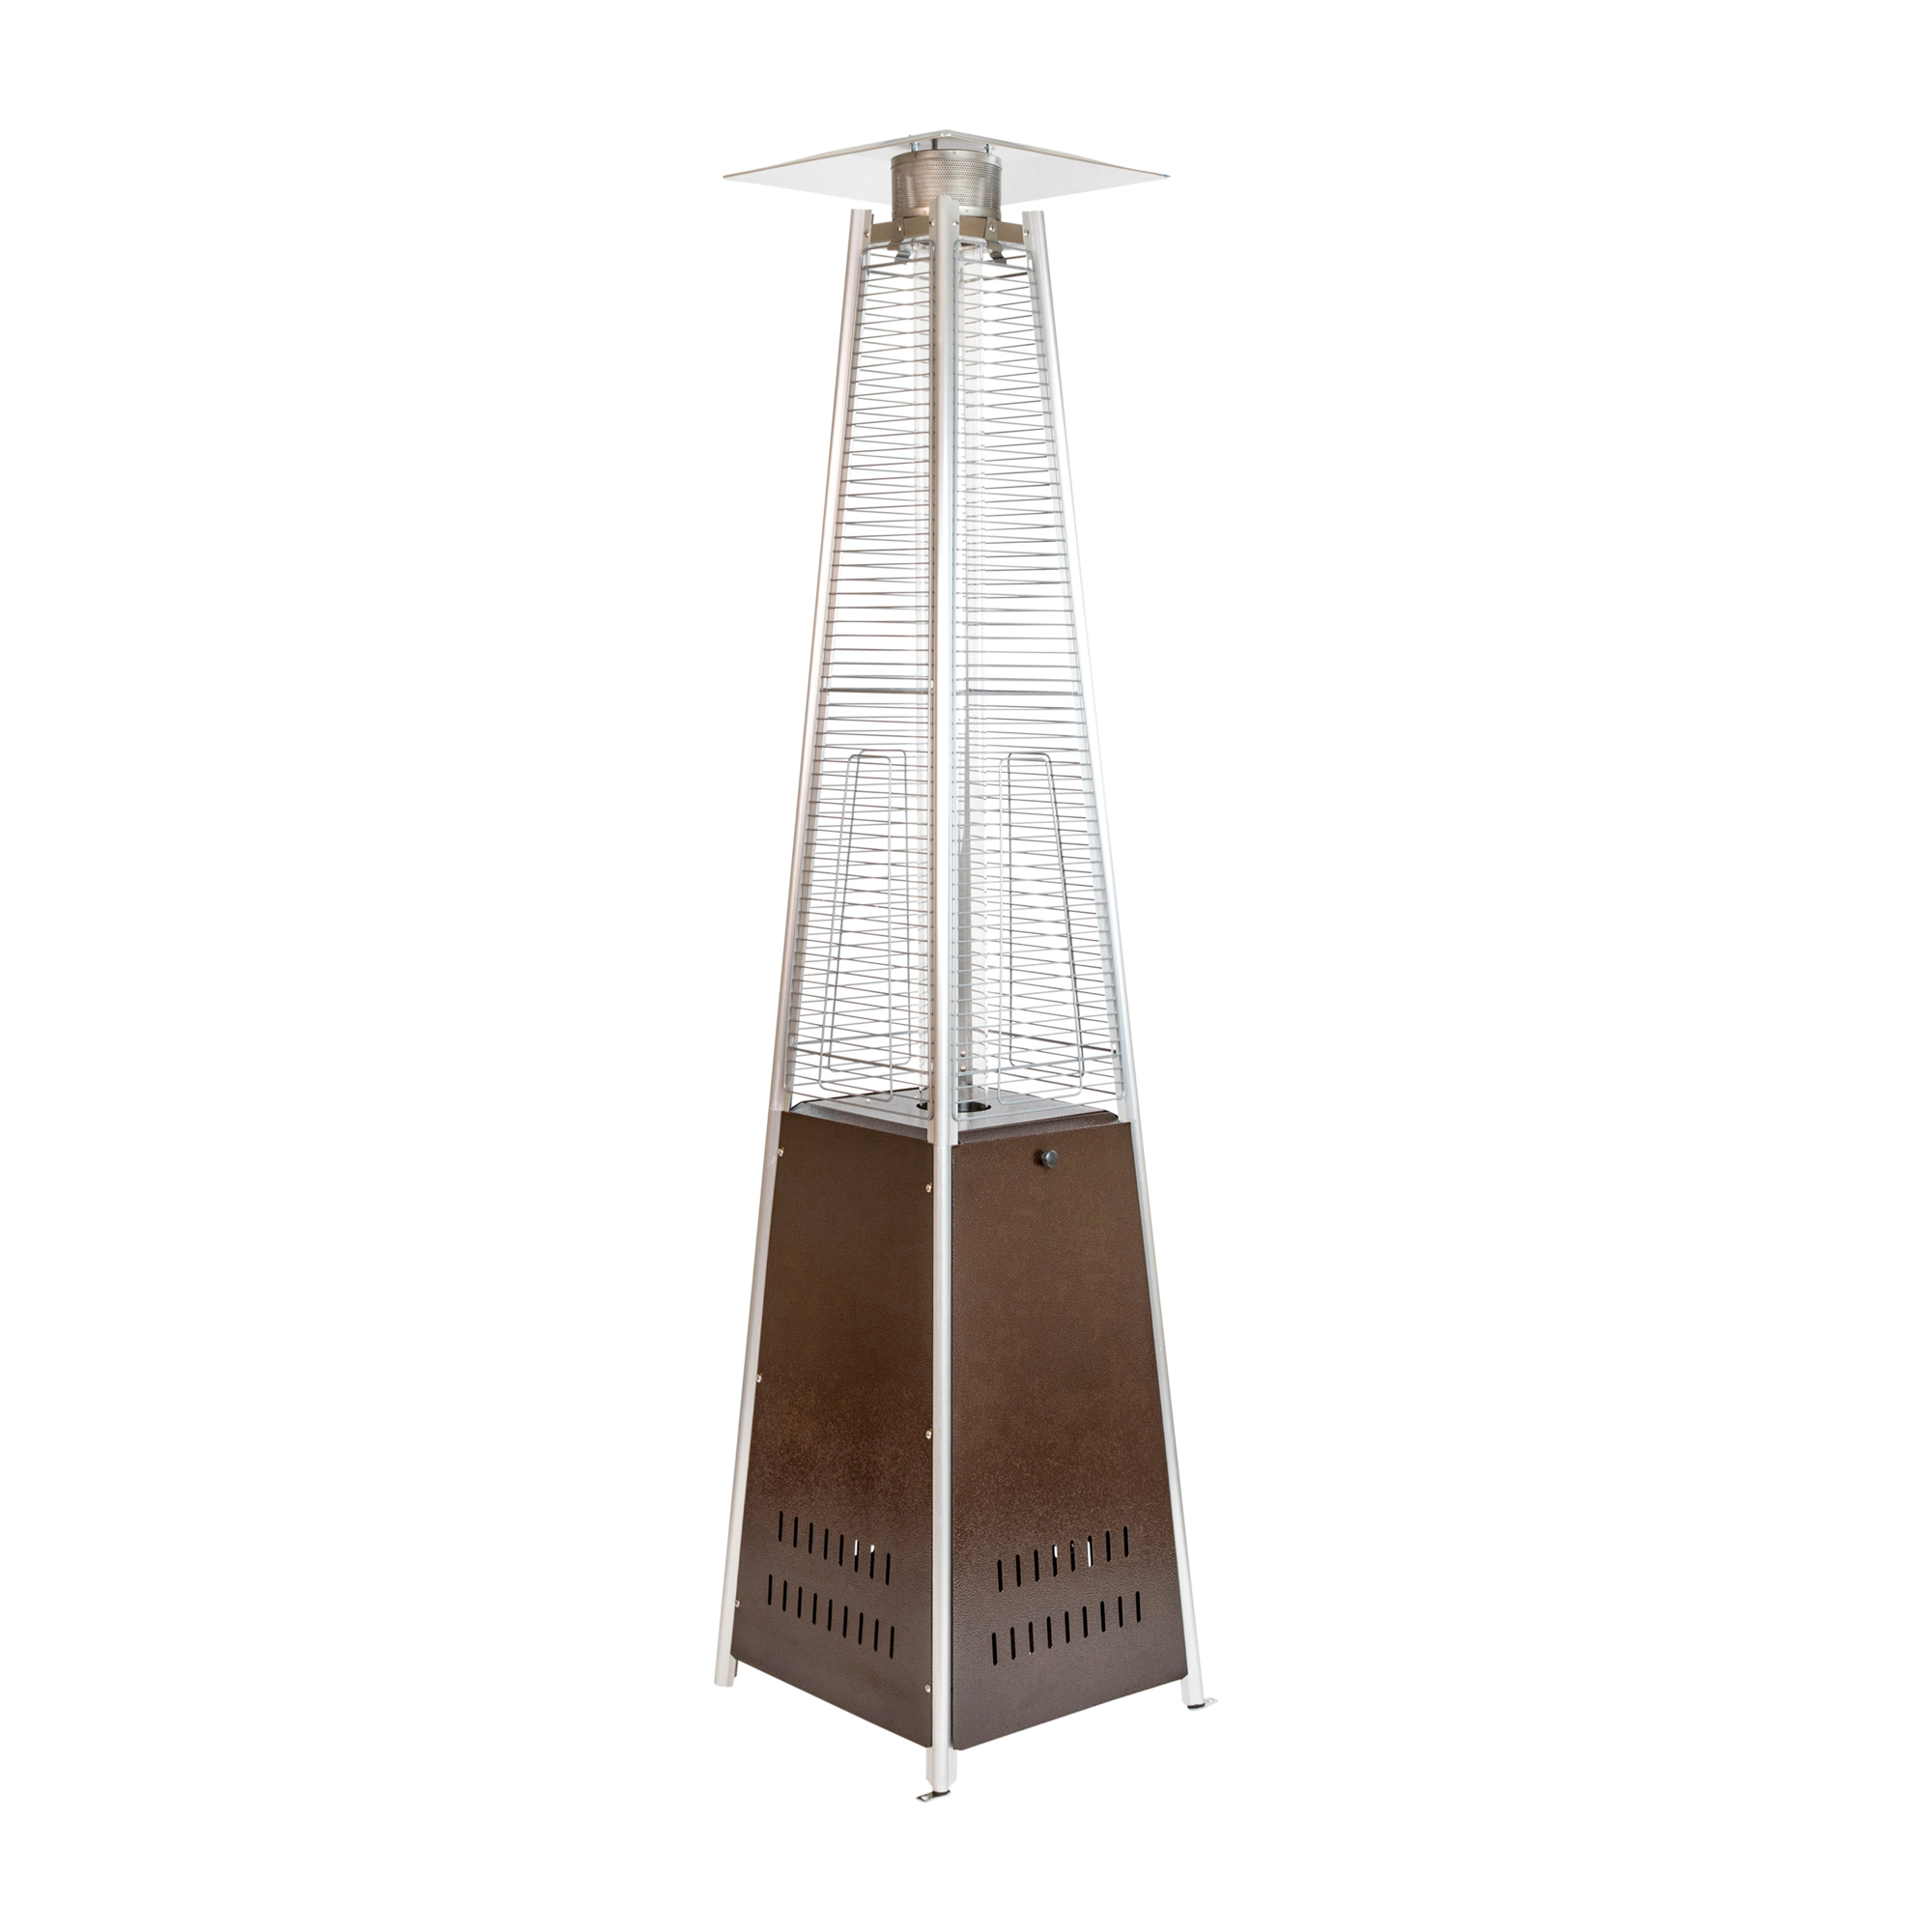 Flash Furniture, Pyramid Outdoor Patio Heater-Bronze -7.5ft. Tall, Fuel Type Propane, Diameter 0 in, Material Stainless Steel, Model NANFSDC02BR